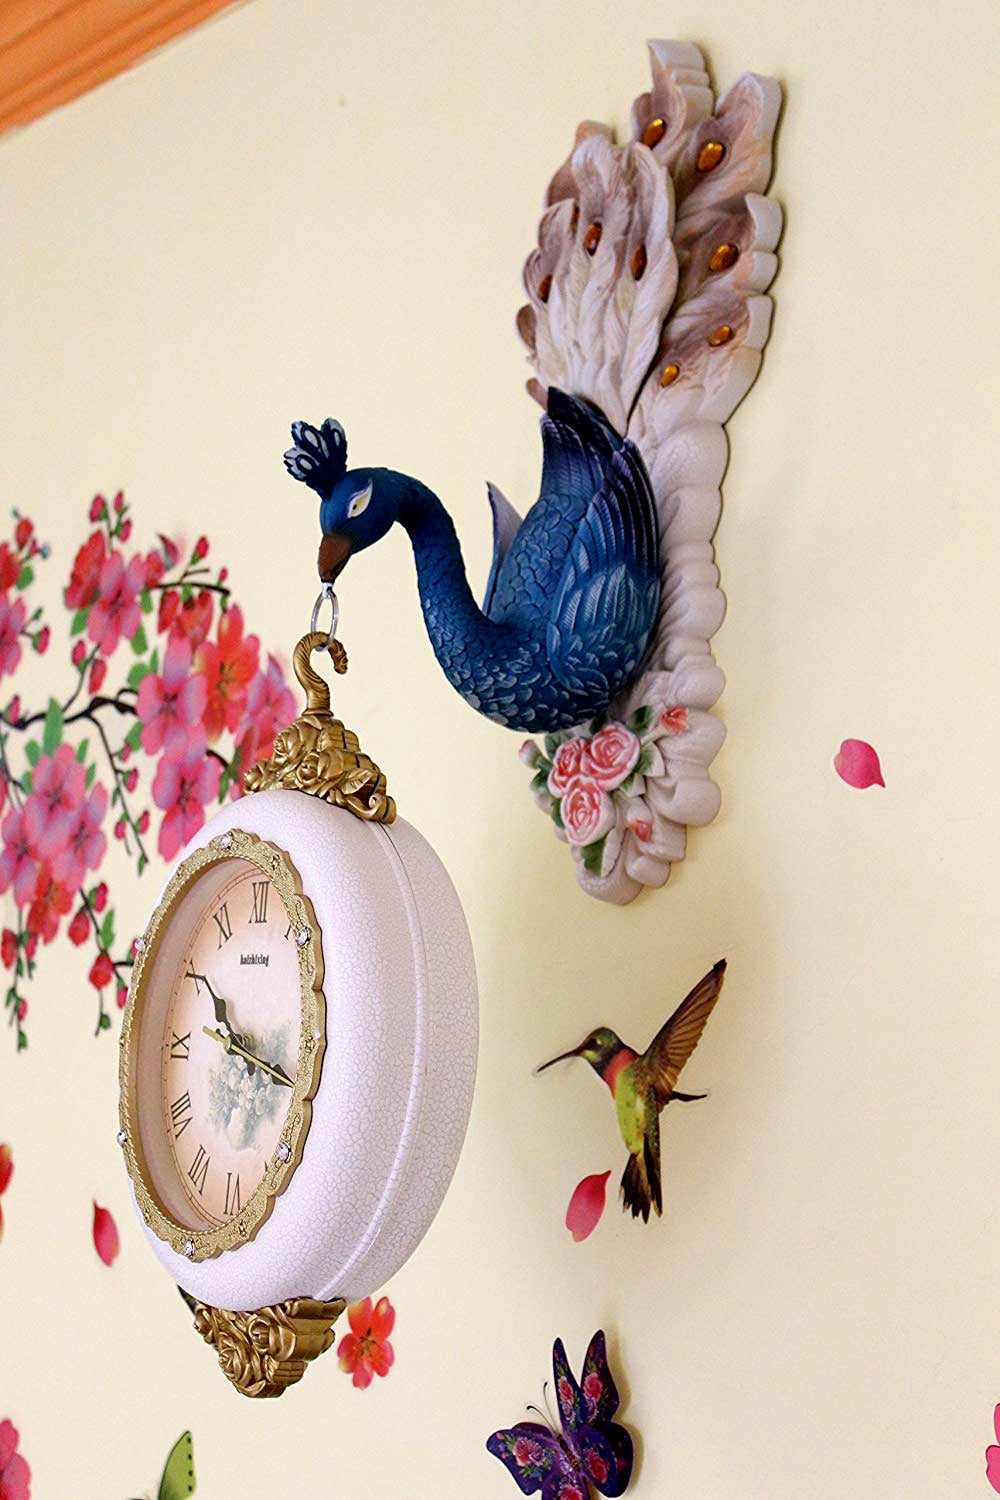 FunkyTradition Royal Multicolor Dual Hanging Peacock Wall Clock for Home Office Decor and Gifts 75 CM Tall